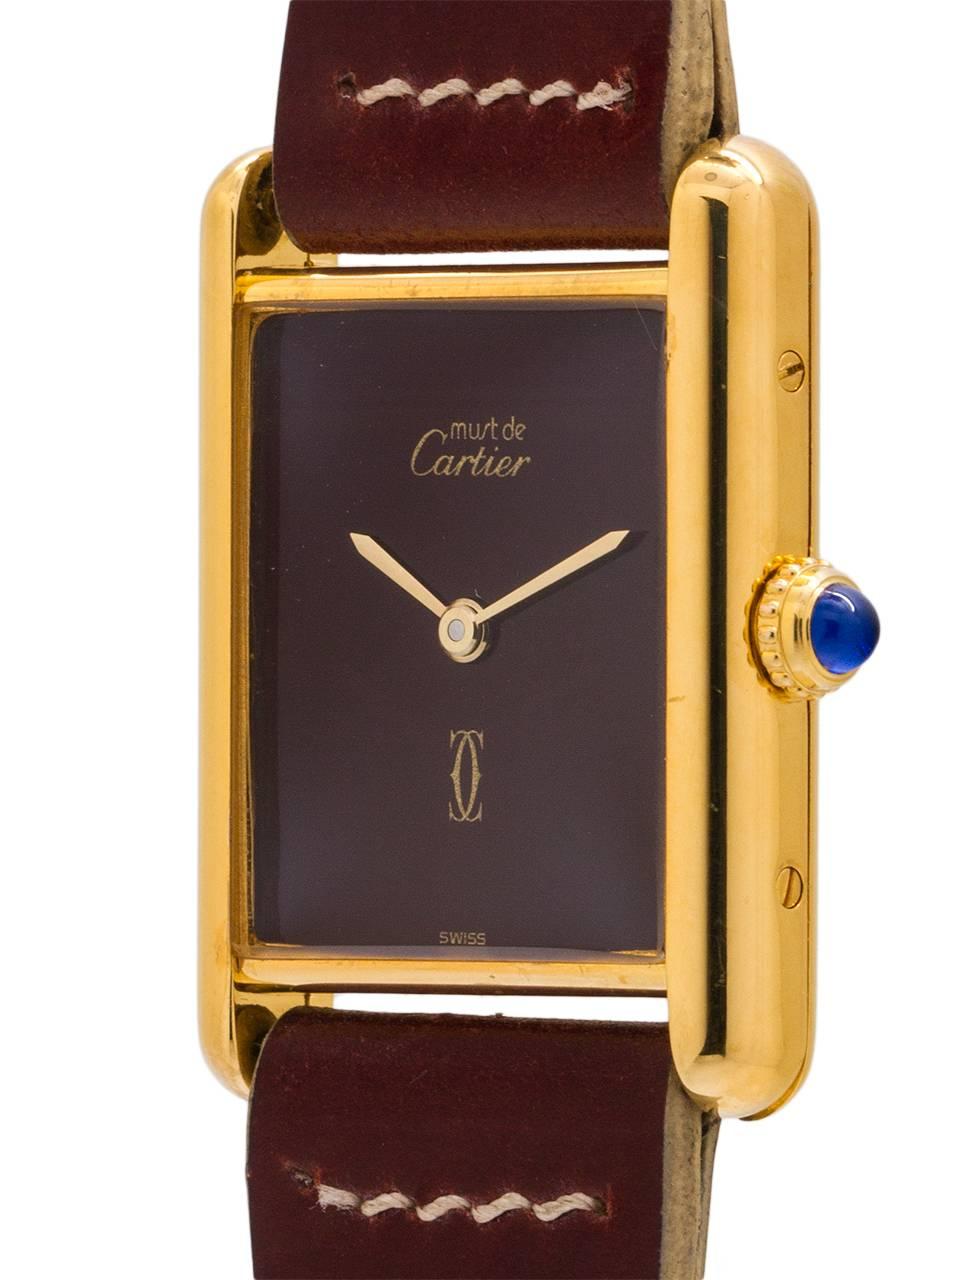 
Cartier lady’s vermeil Tank Louis circa 1980s. Featuring a 21 X 27mm case secured by 4 side and 4 caseback screws. Featuring original burgundy color dial signed Must de Cartier and with Cartier double C logo, gilt hands, and blue cabochon sapphire